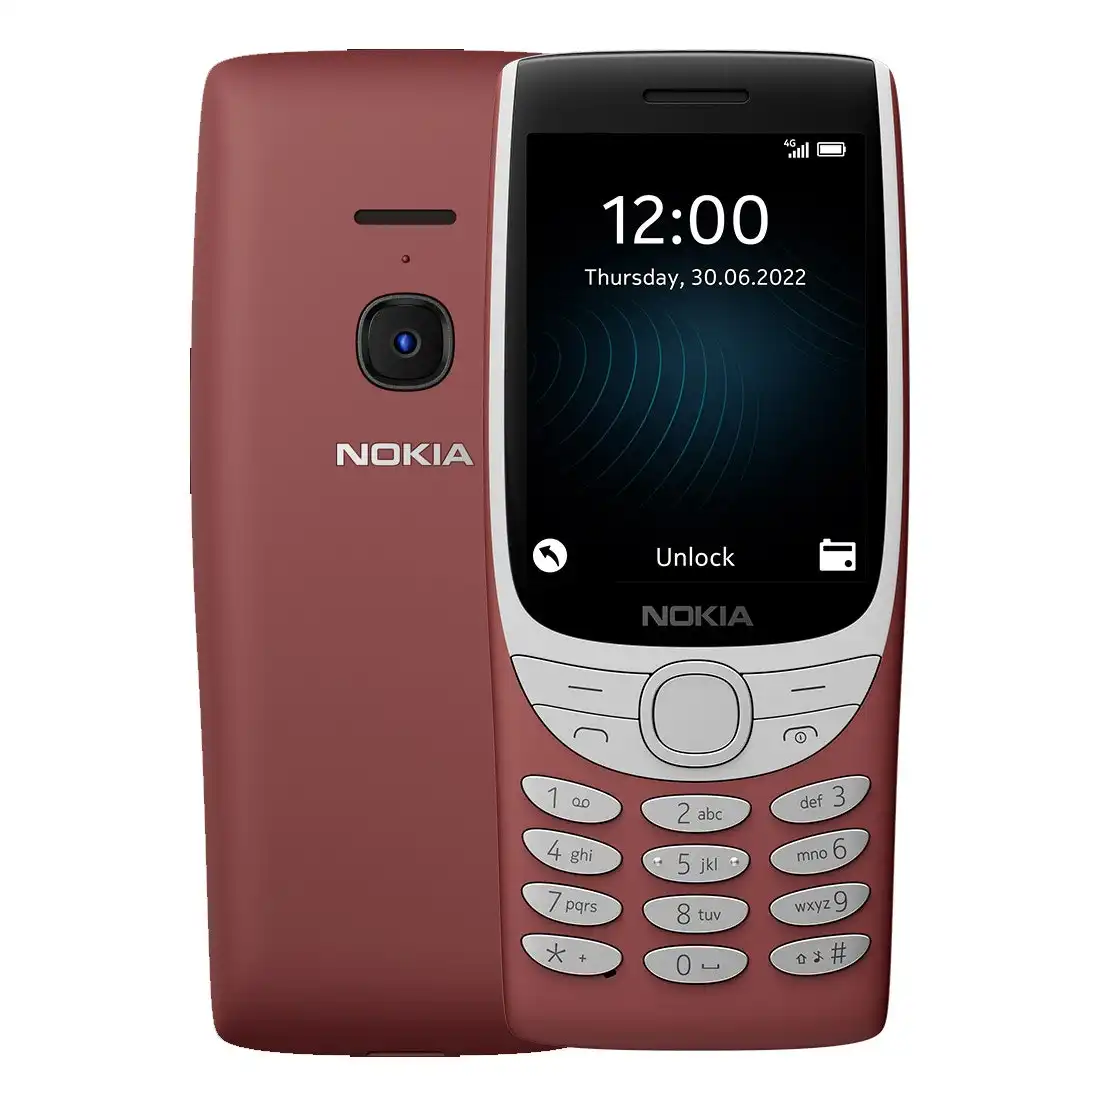 Nokia 8210 4G (Dual Sim, 2.8 inches, 128MB/48MB) Feature phone - Anzo Red